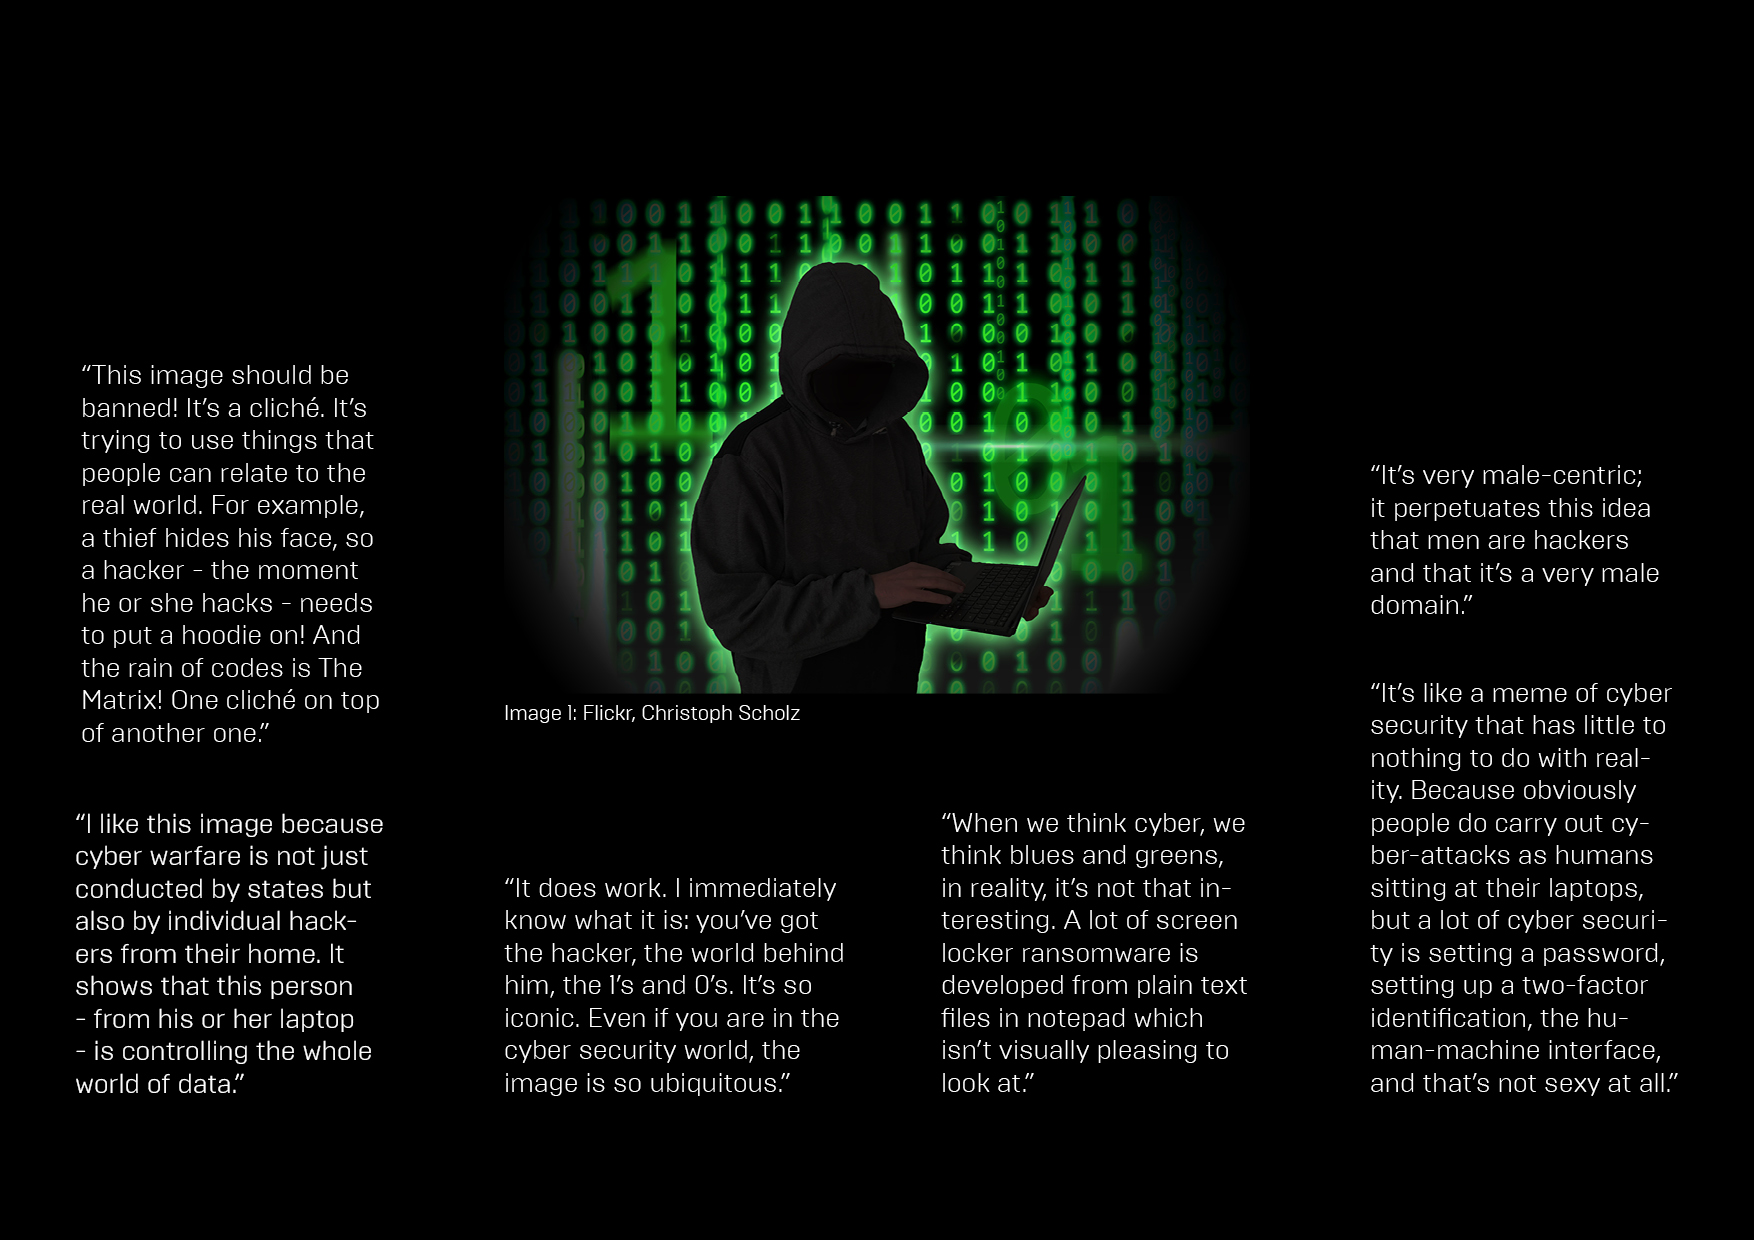 The hooded man at the computer: What are cyber images telling us?